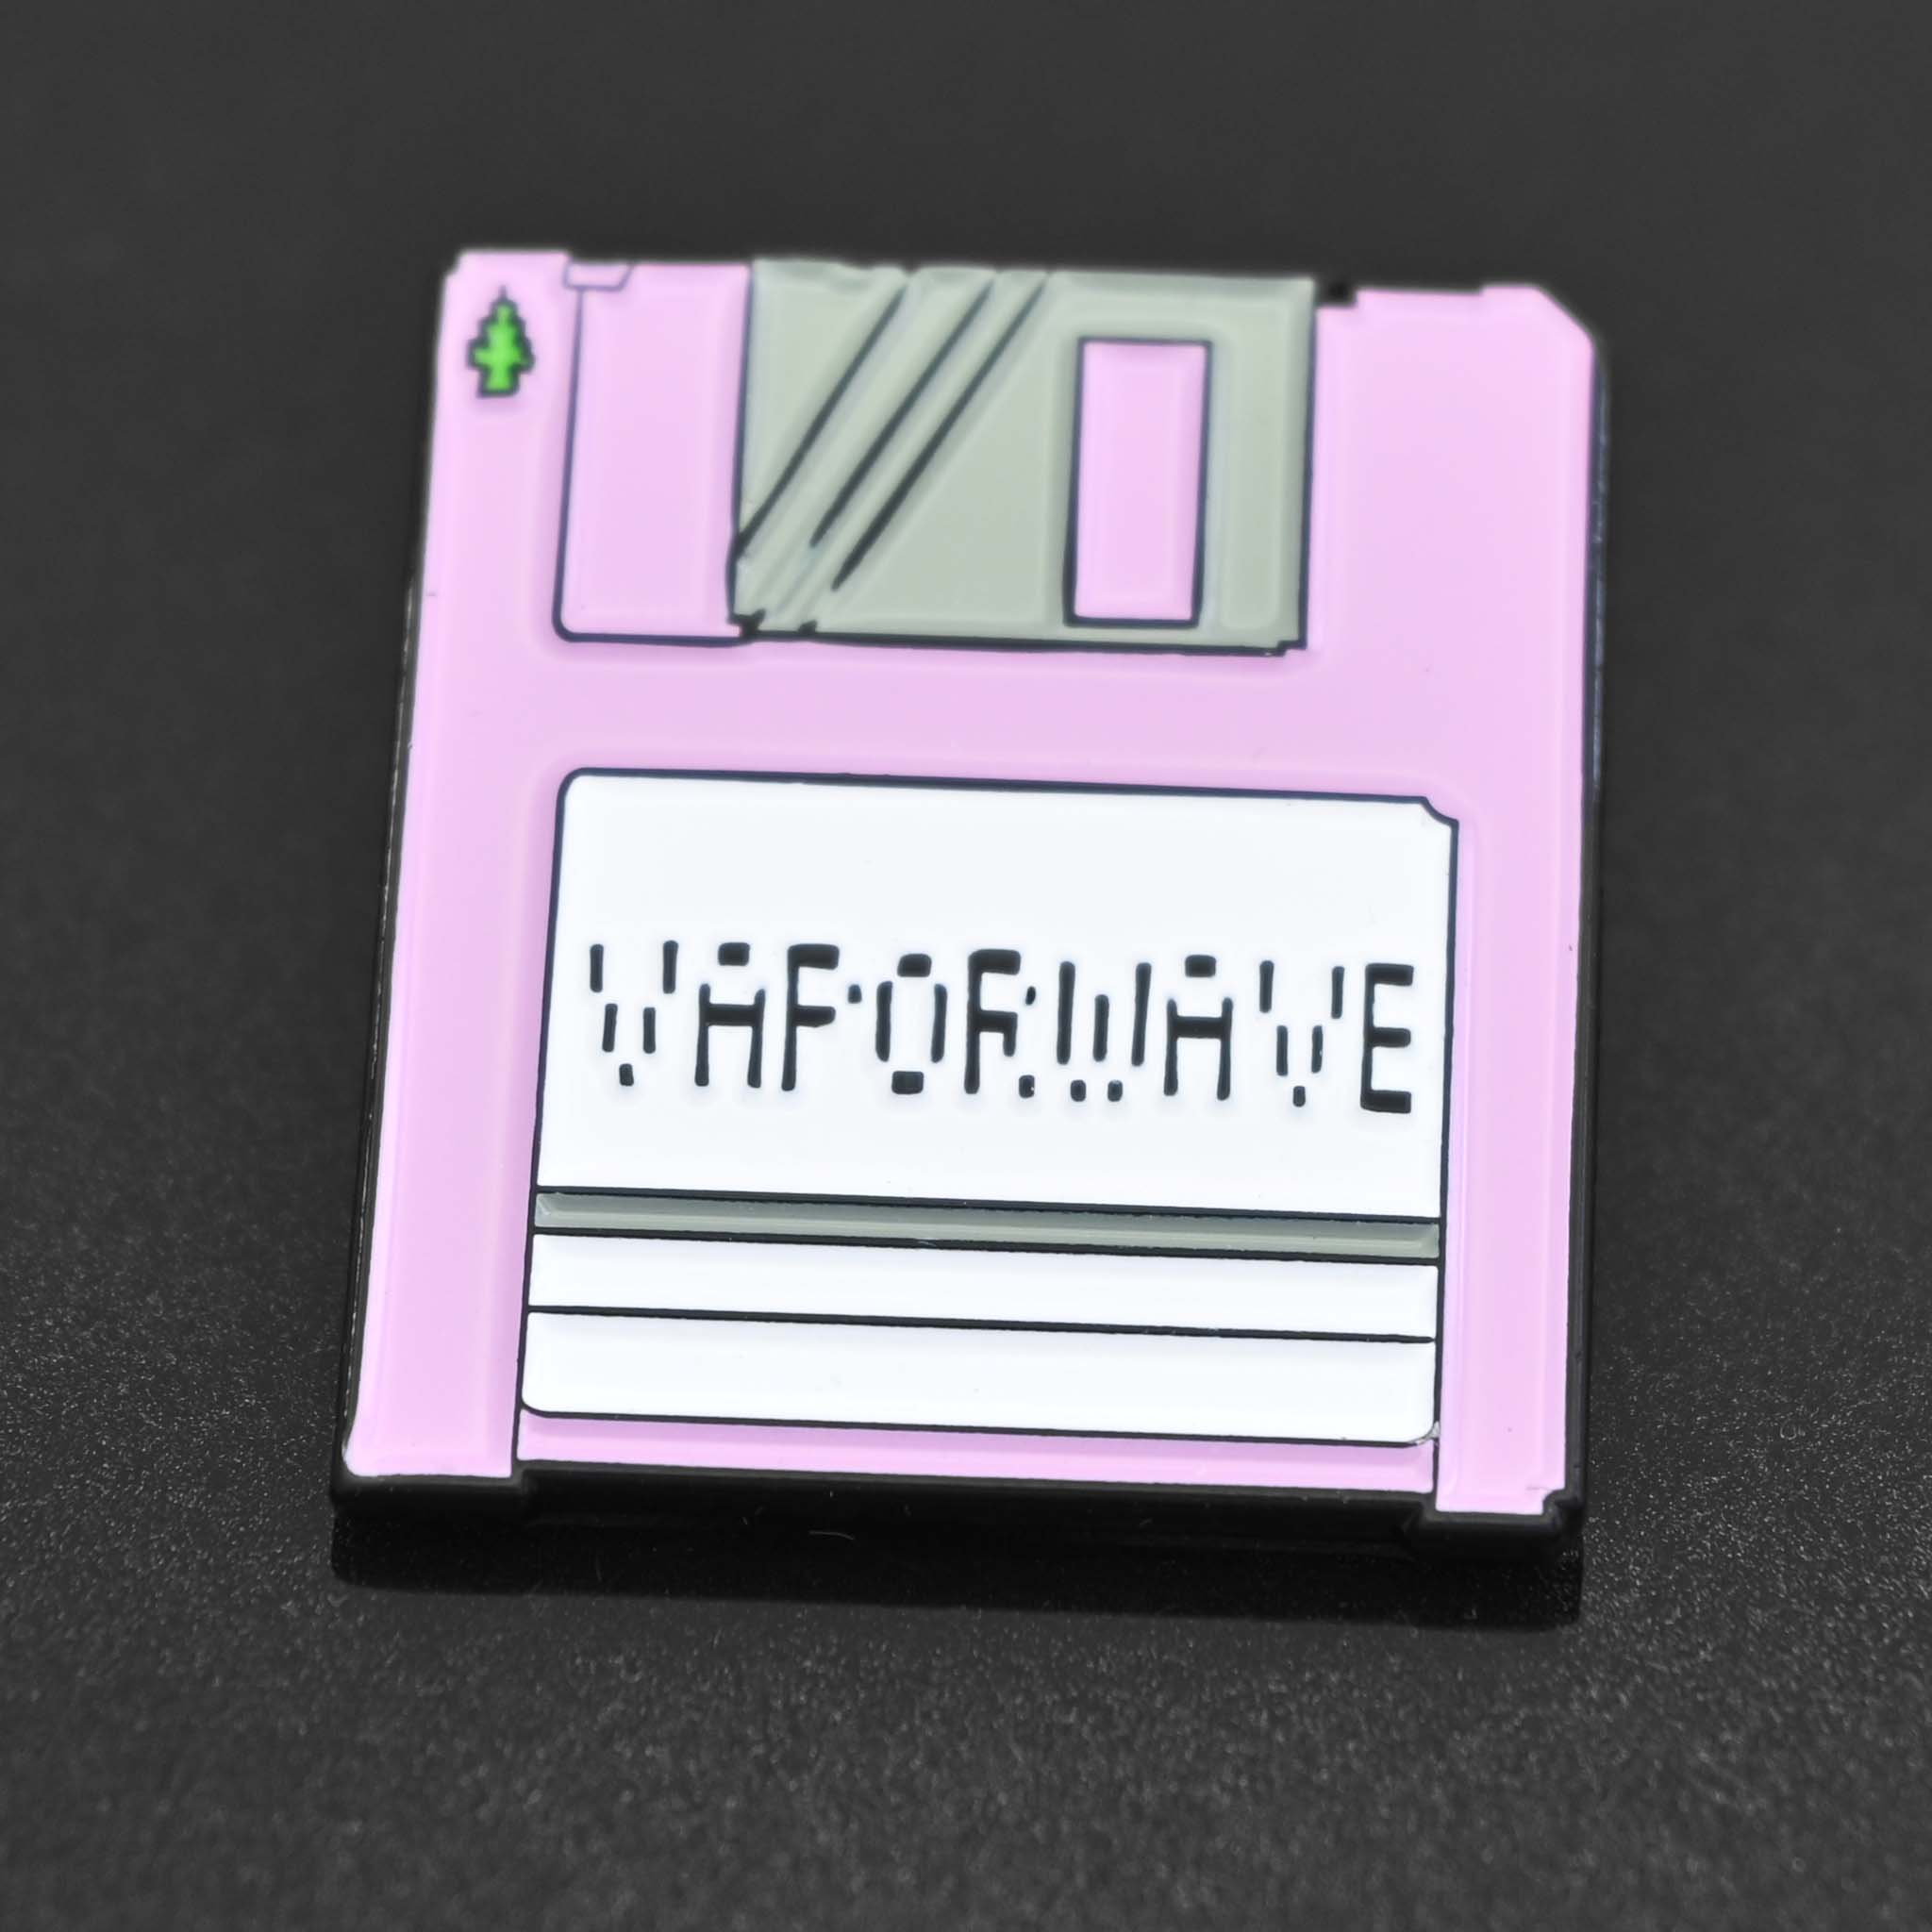 Enamel pin of a pink disk with a label of Vaporwave. 